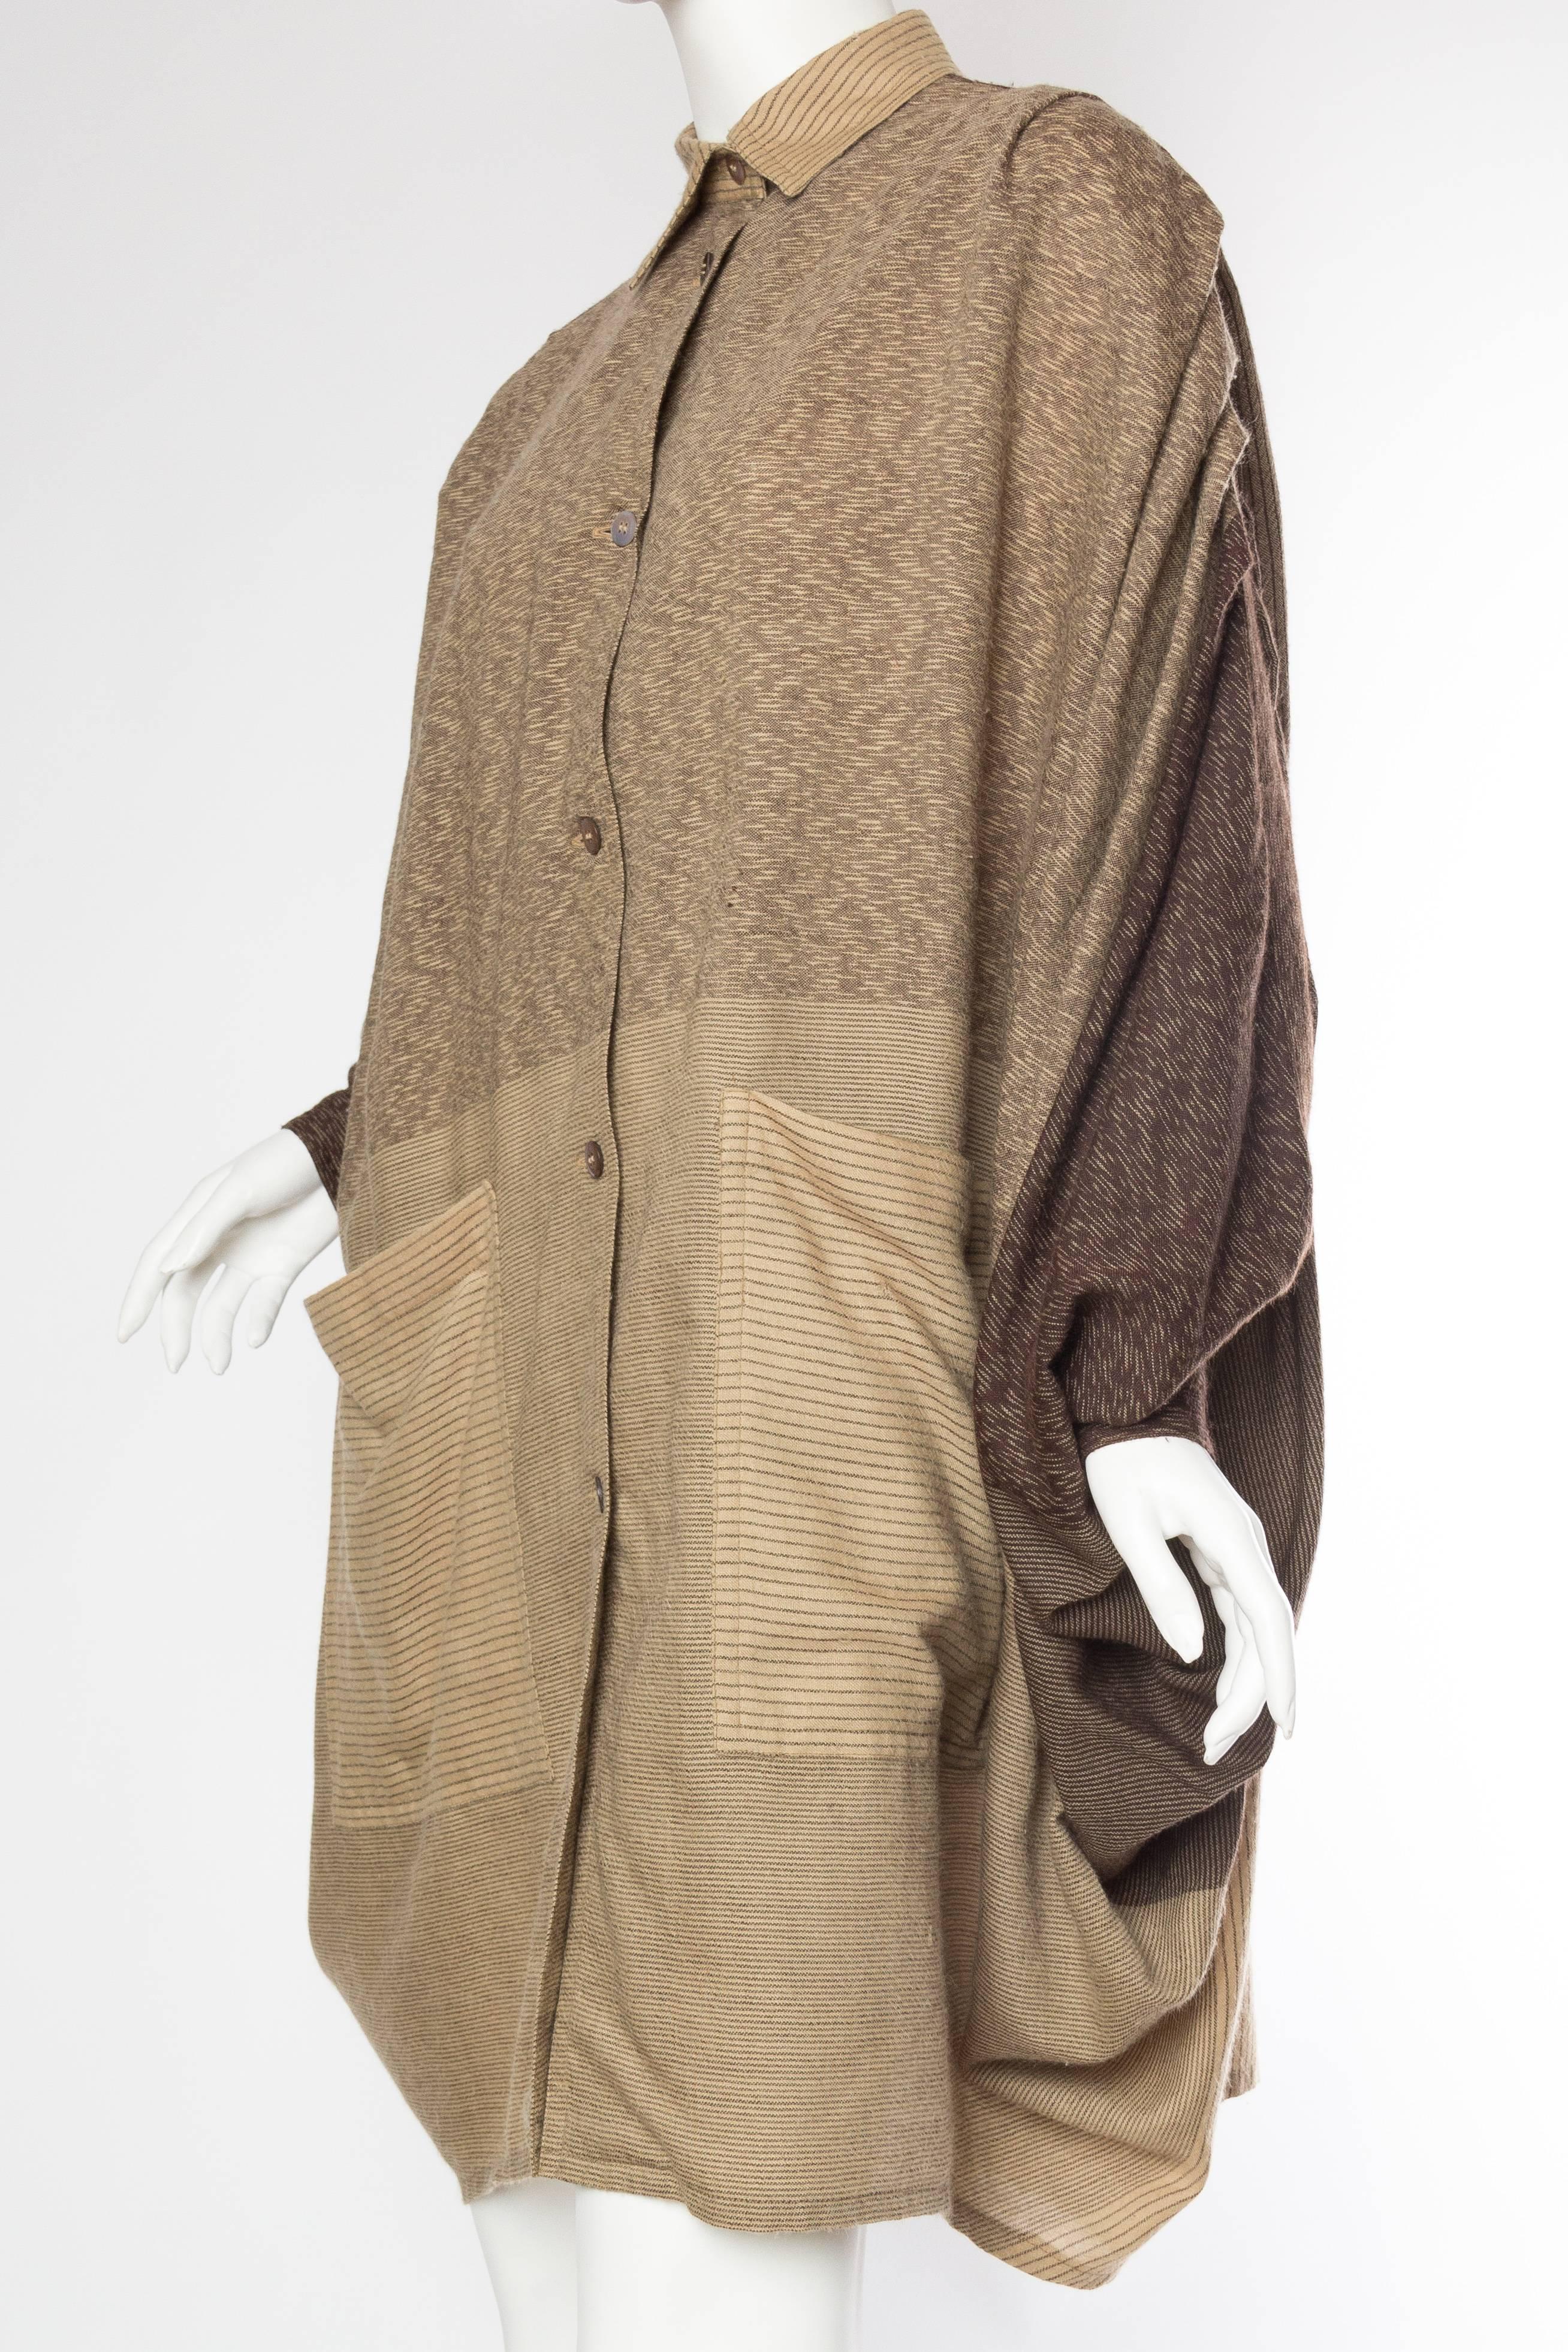 1980S ISSEY MIYAKE Tan & Brown Wool Blend Oversized Shirt Pleated Pants Ensemble For Sale 1